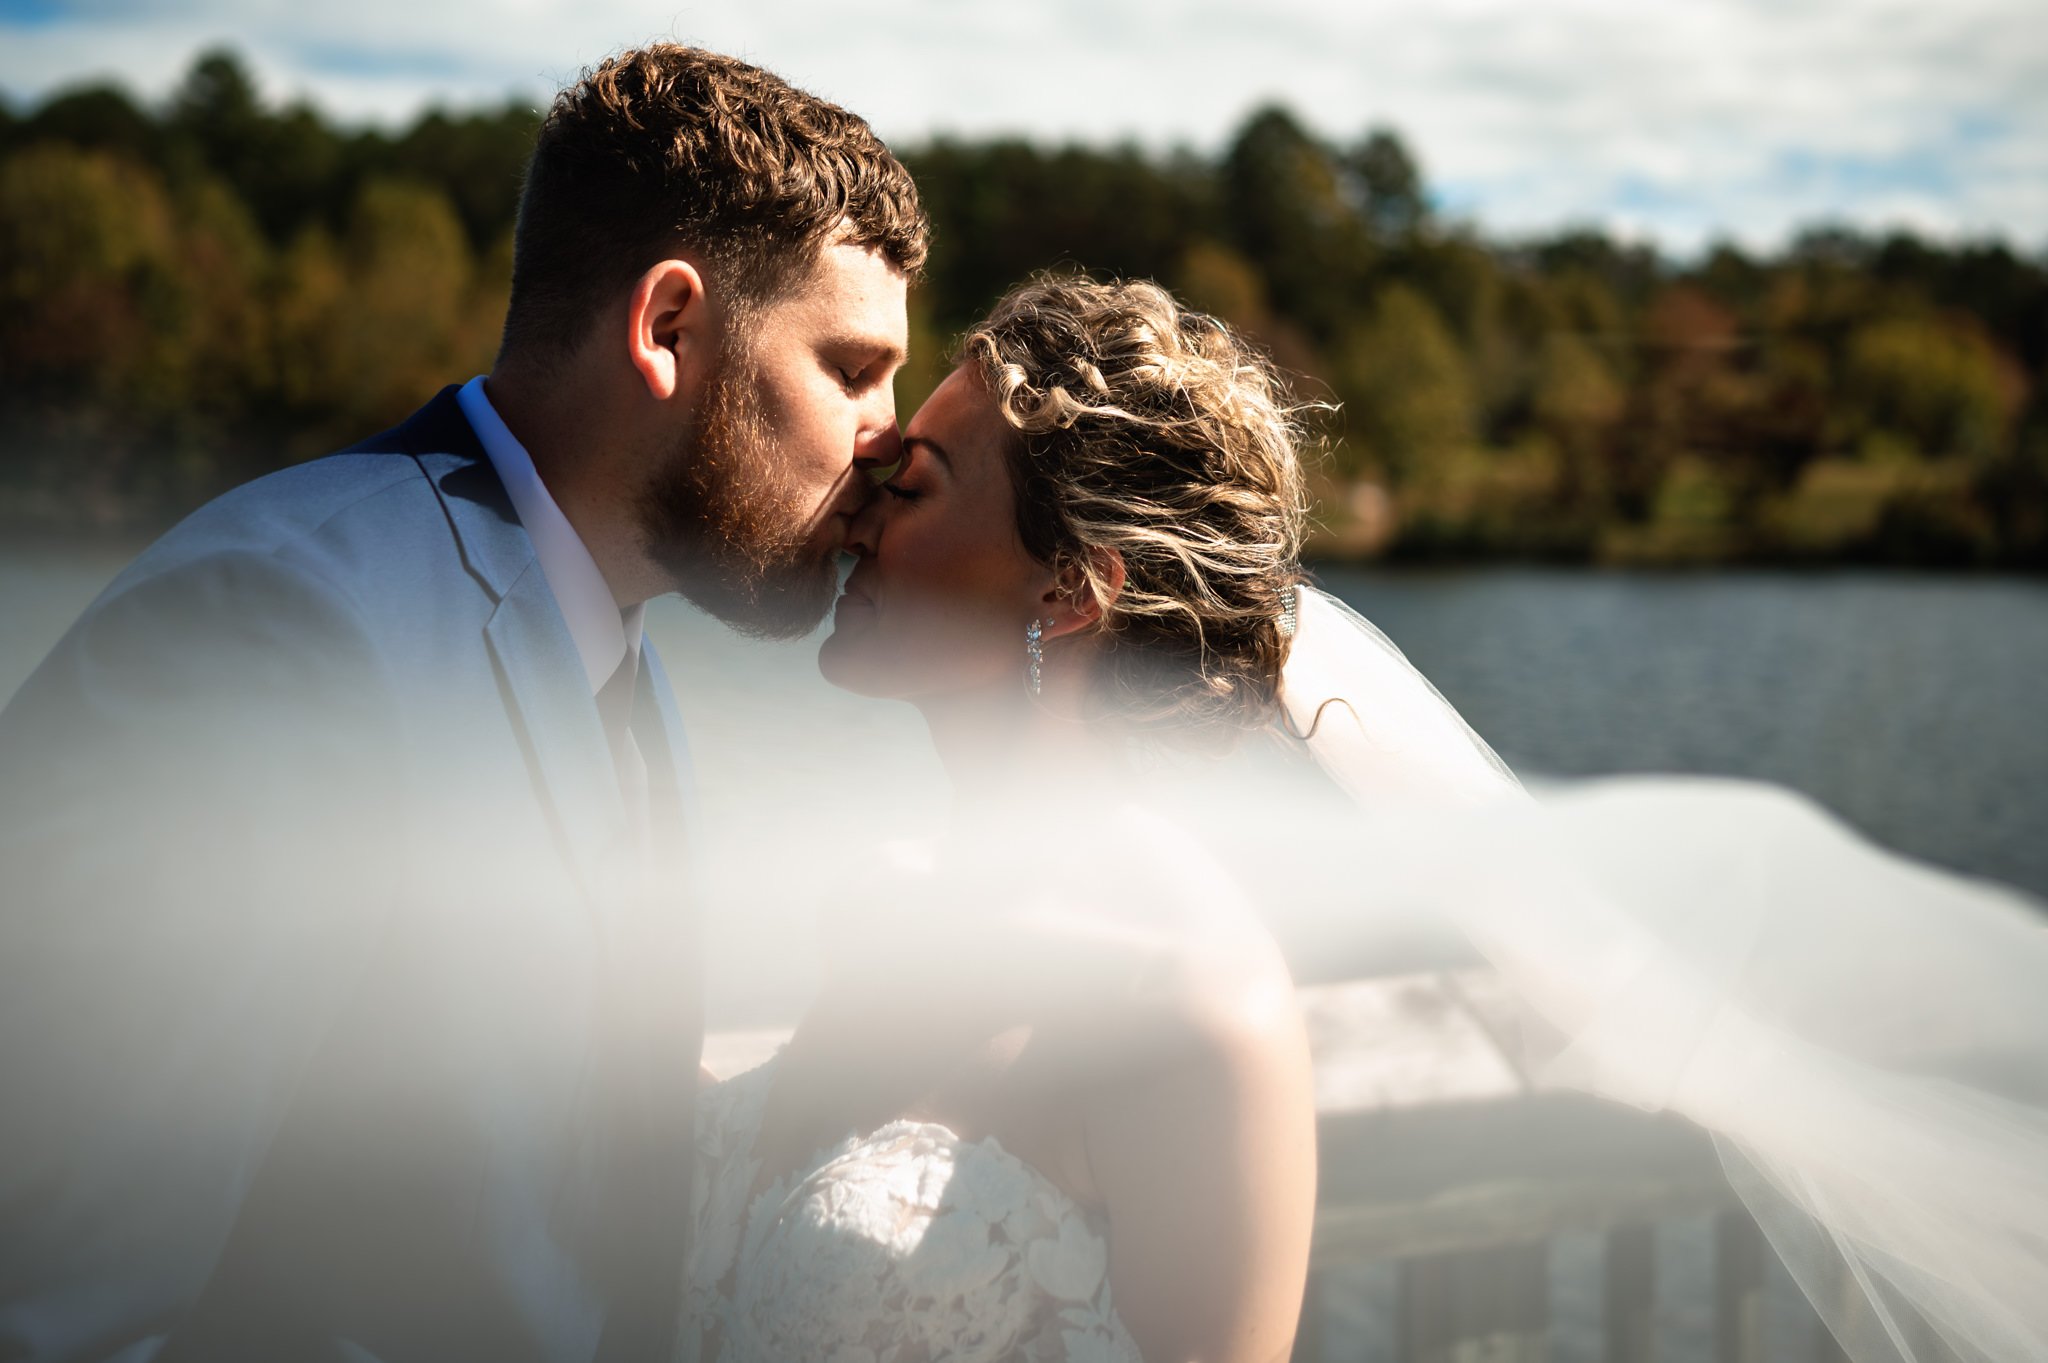 A beautiful moment captured in photography as a bride and groom share a passionate kiss against the serene backdrop of a lake.